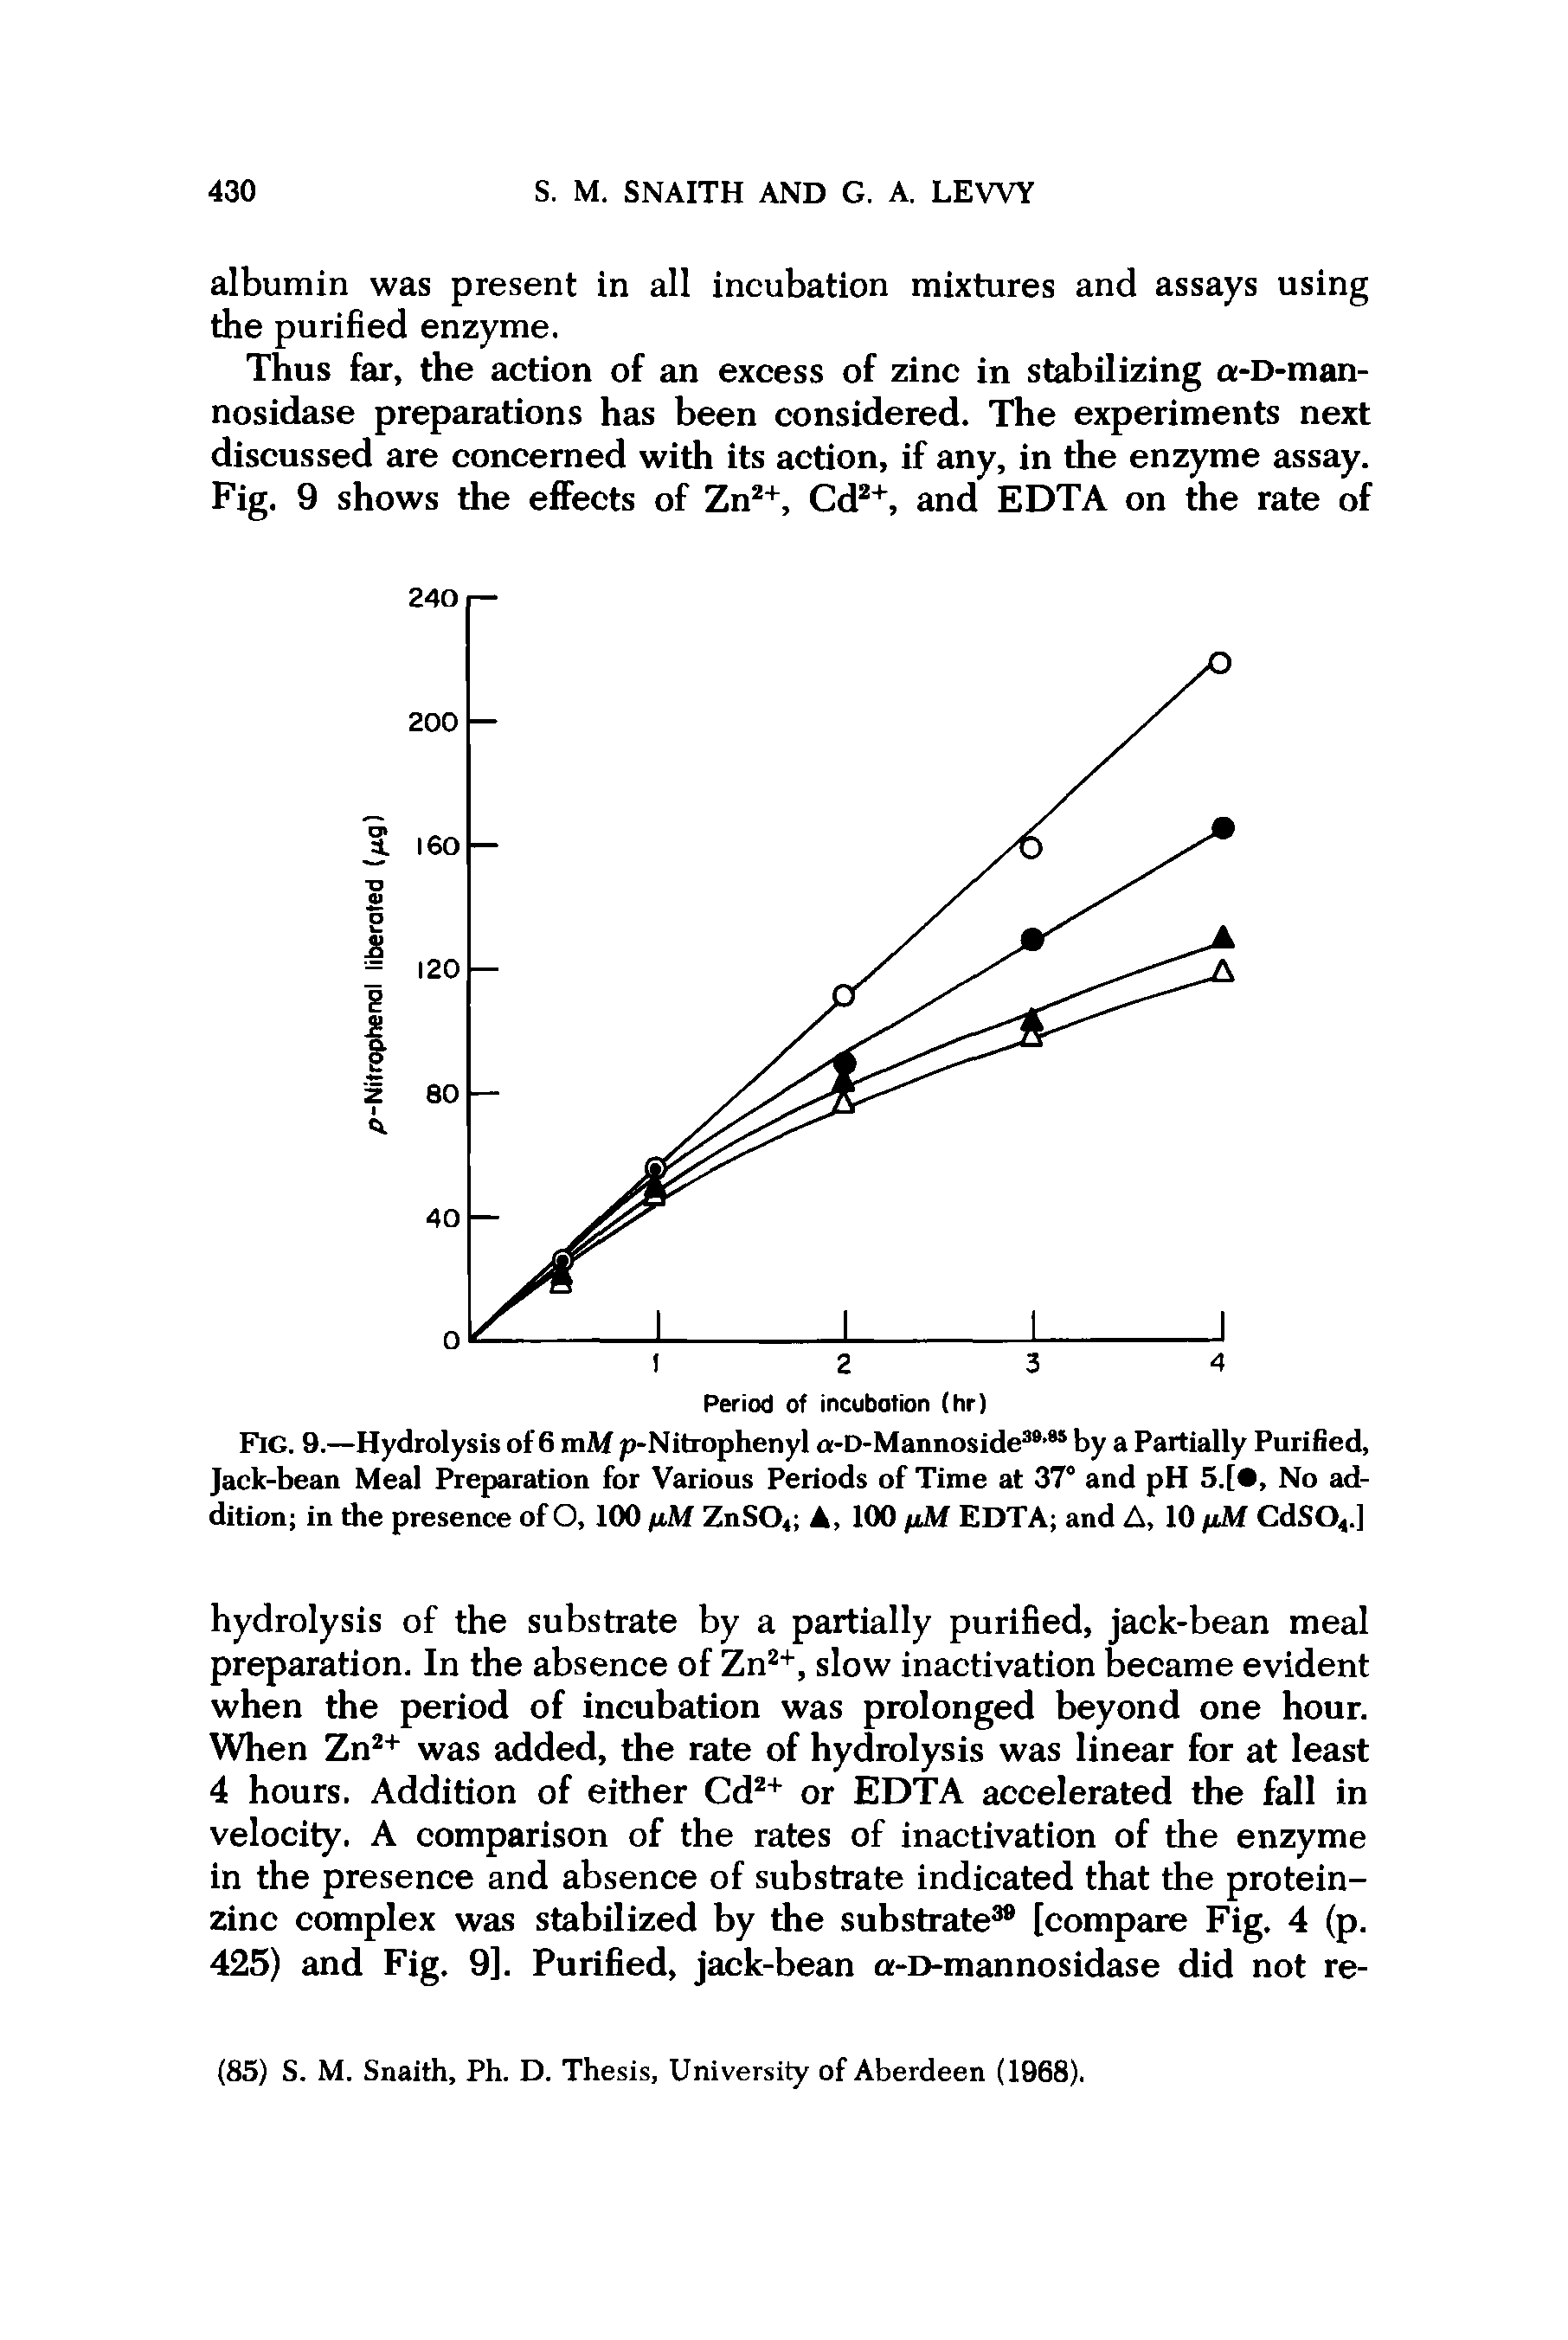 Fig. 9.—Hydrolysis of 6 mM p-Nitrophenyl a-D-Mannoside39,95 by a Partially Purified, Jack-bean Meal Preparation for Various Periods of Time at 37° and pH 5.[, No addition in the presence of O, 100 /J.M ZnS04 , 100 (jM EDTA and A, 10 (iM CdS04.]...